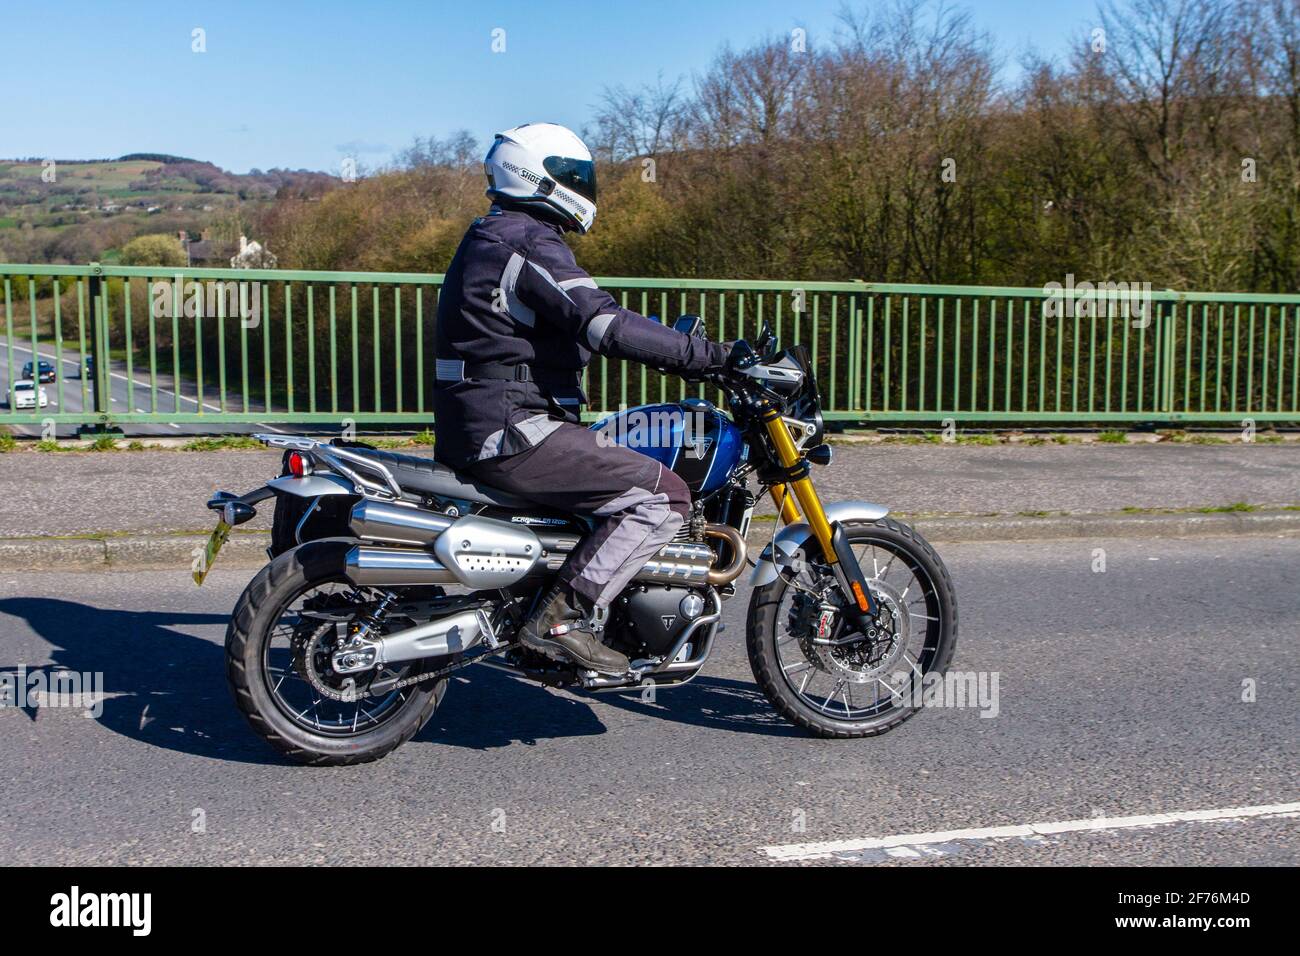 2020 Triumph Scrambler 1200 XE 1200cc sports; Motorbike rider; two wheeled transport, motorcycles, vehicle on British roads, motorbikes, motorcycle bike riders motoring in Manchester, UK Stock Photo